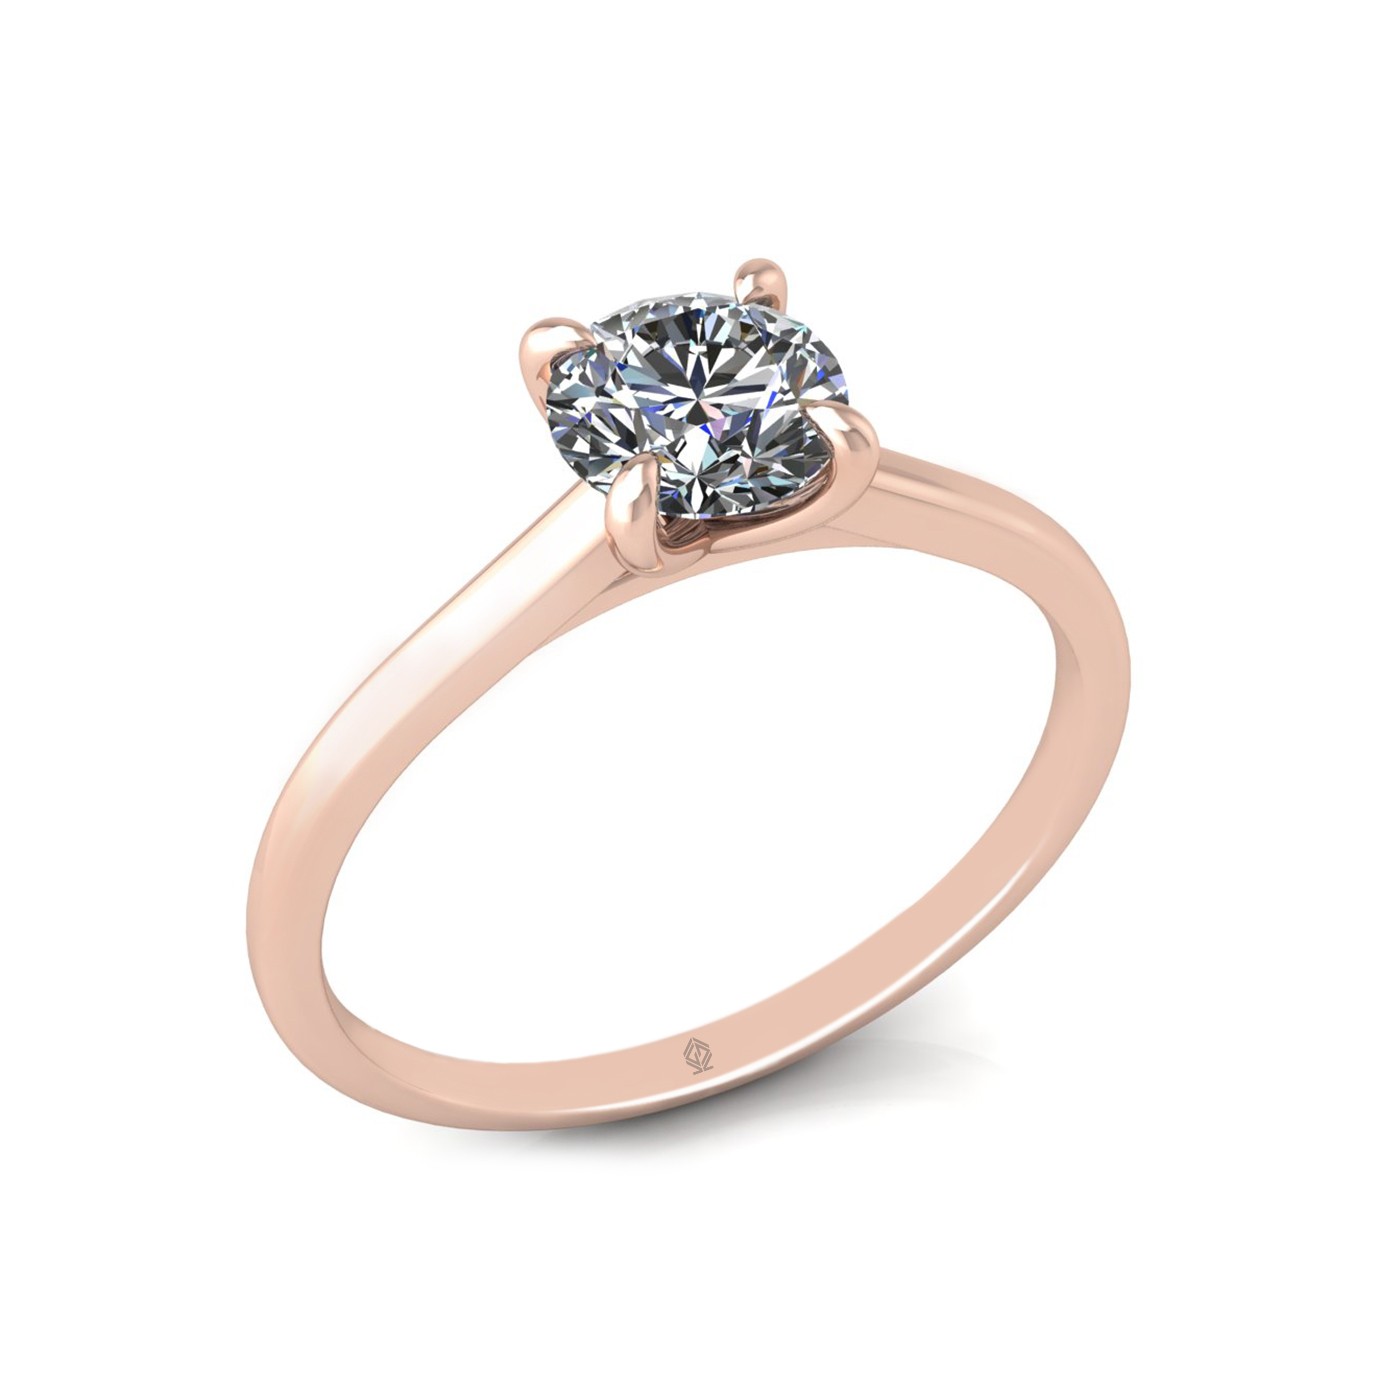 18k rose gold 0,80 ct 4 prongs solitaire round cut diamond engagement ring with whisper thin band